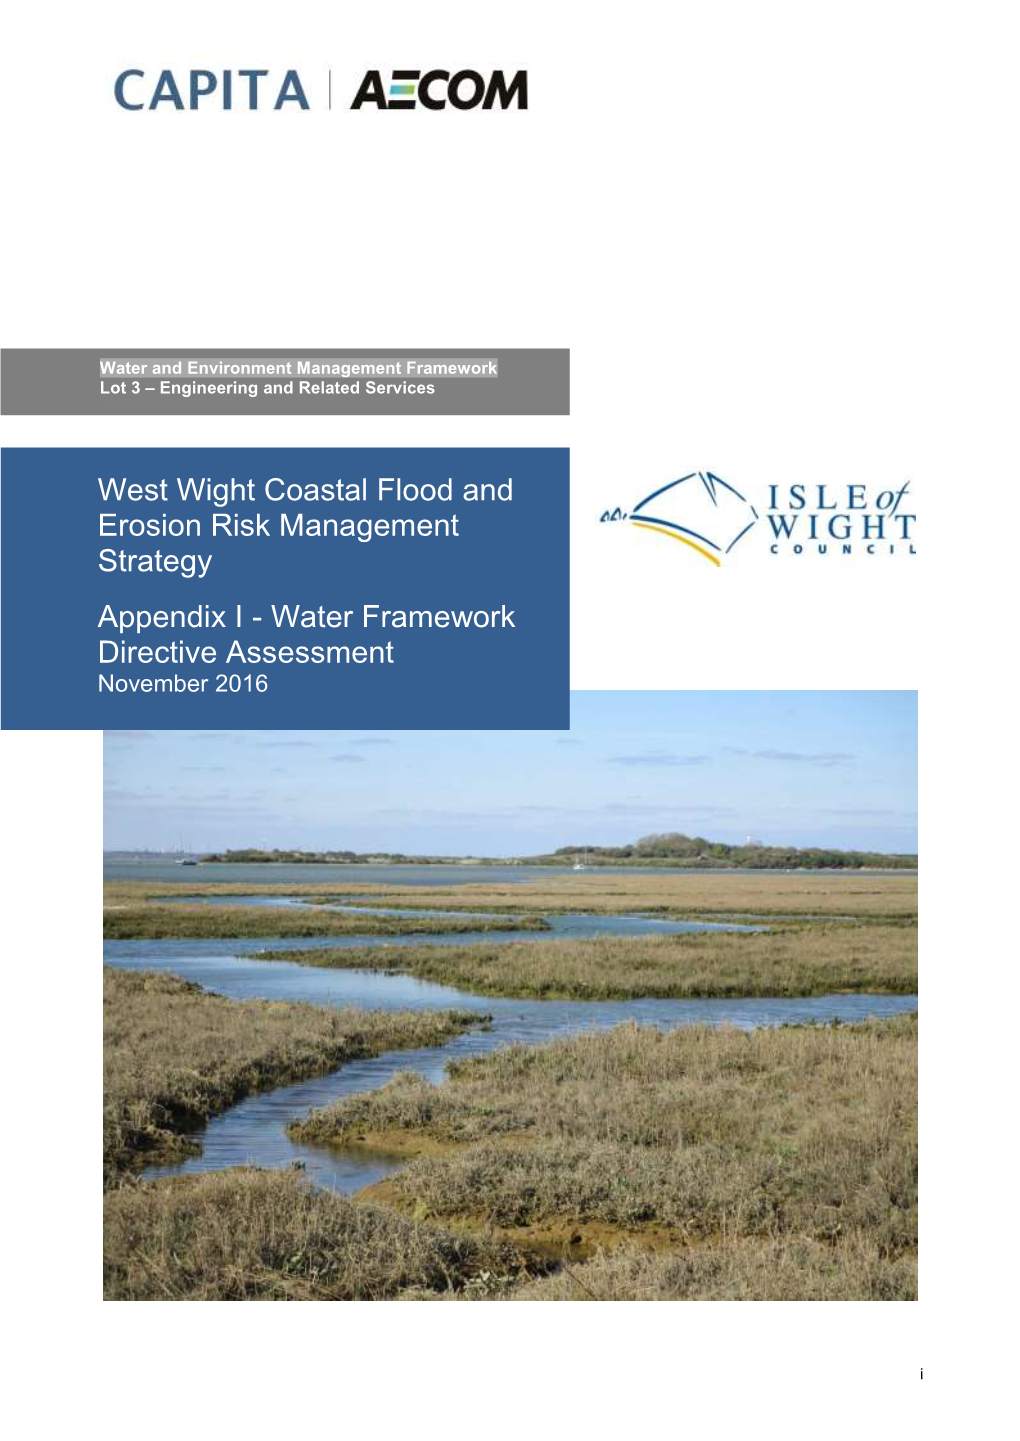 Water Framework Directive Assessment Is Required